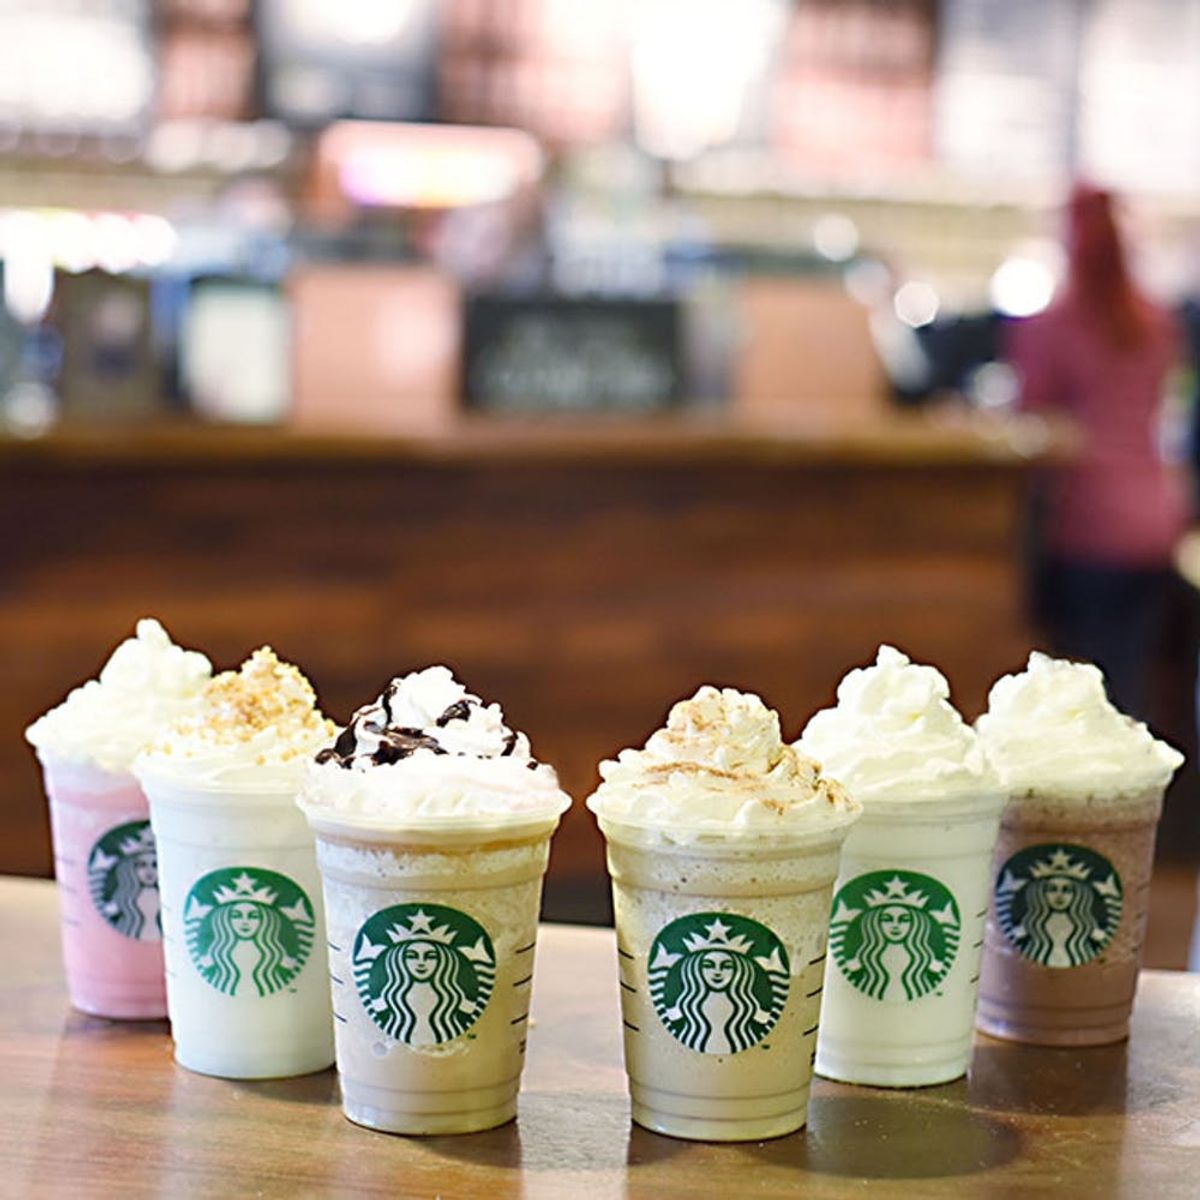 Starbucks Has 6 New Frappuccino Flavors You Need to Try